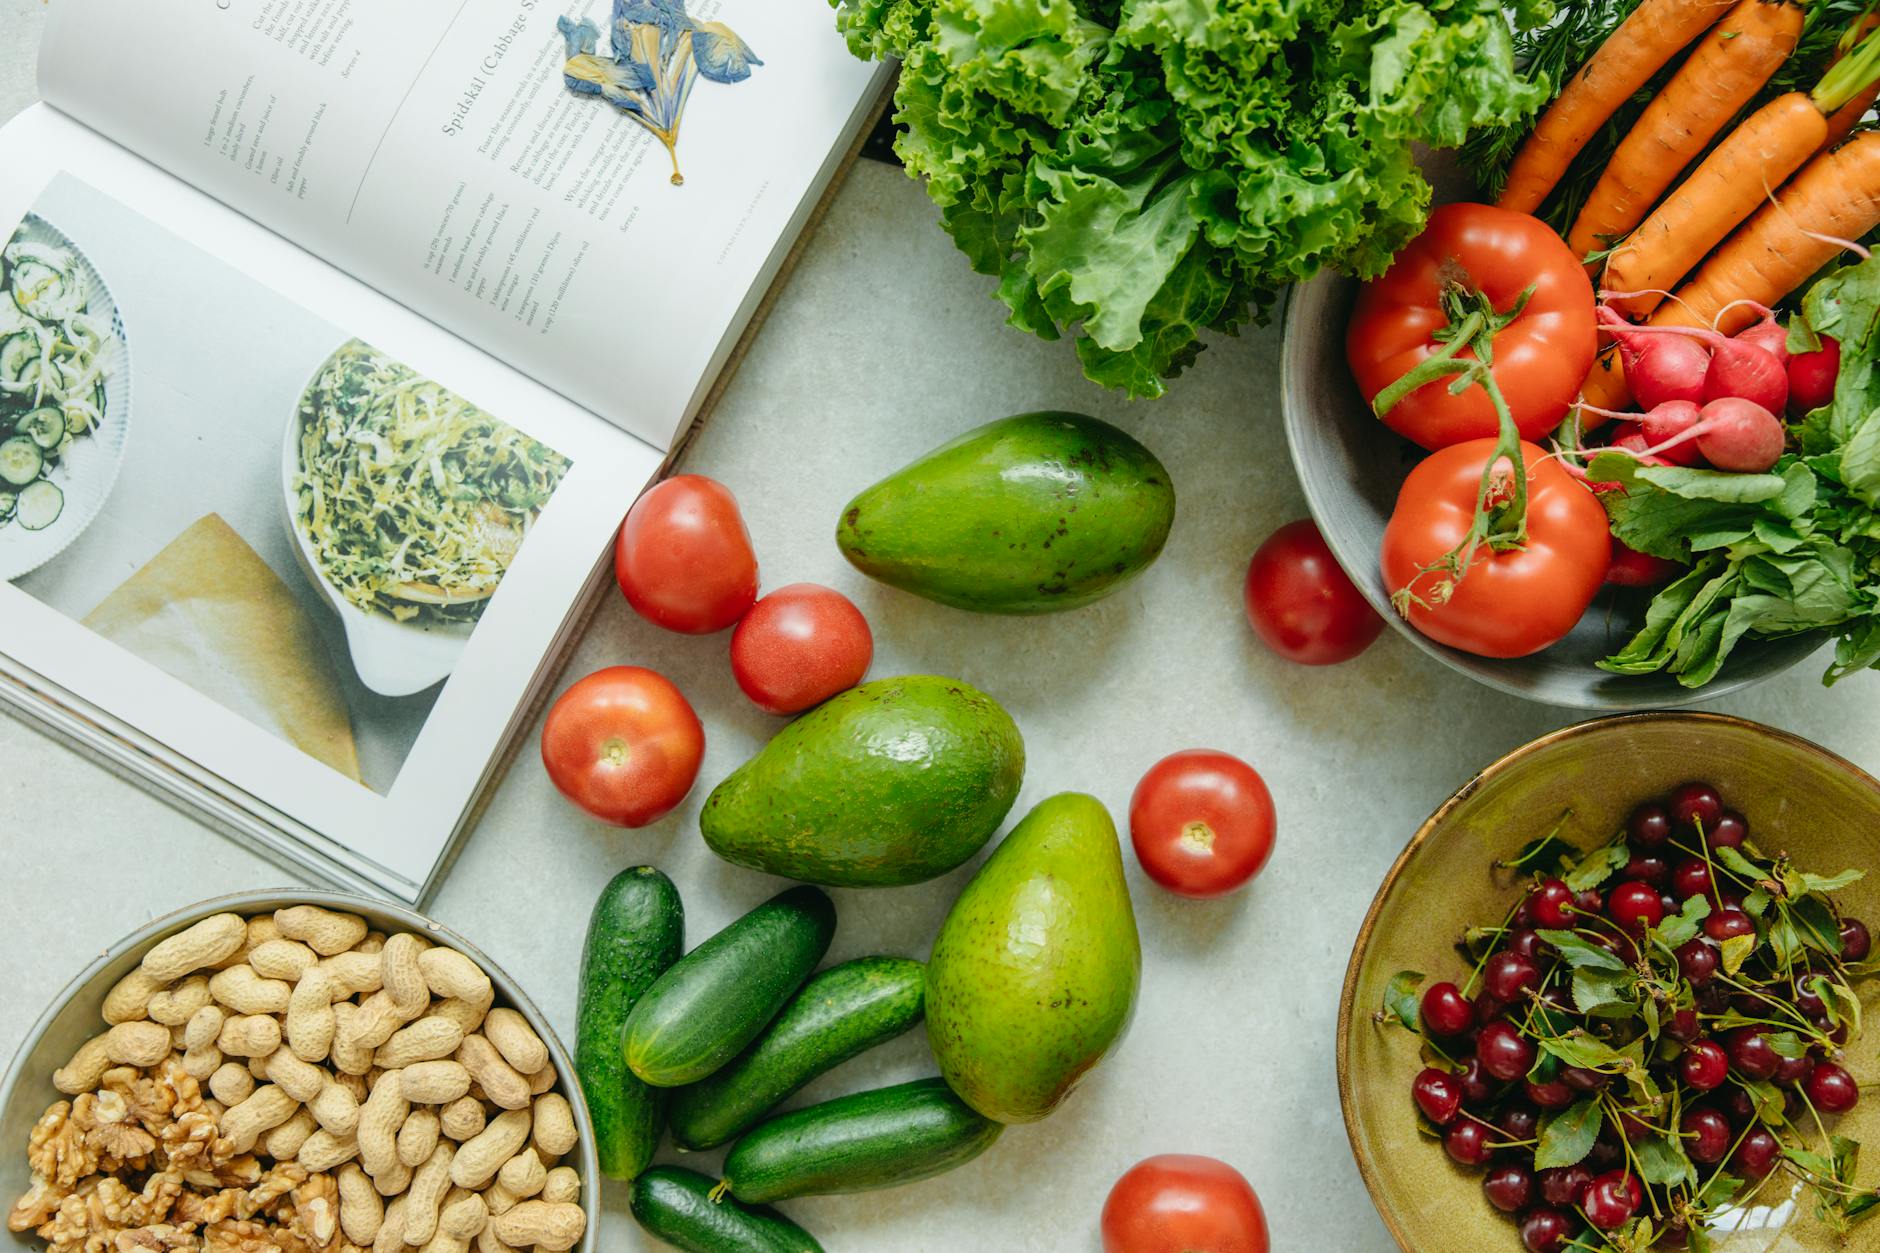 Top View of a Cookbook and Variety of Healthy Foods on a Table